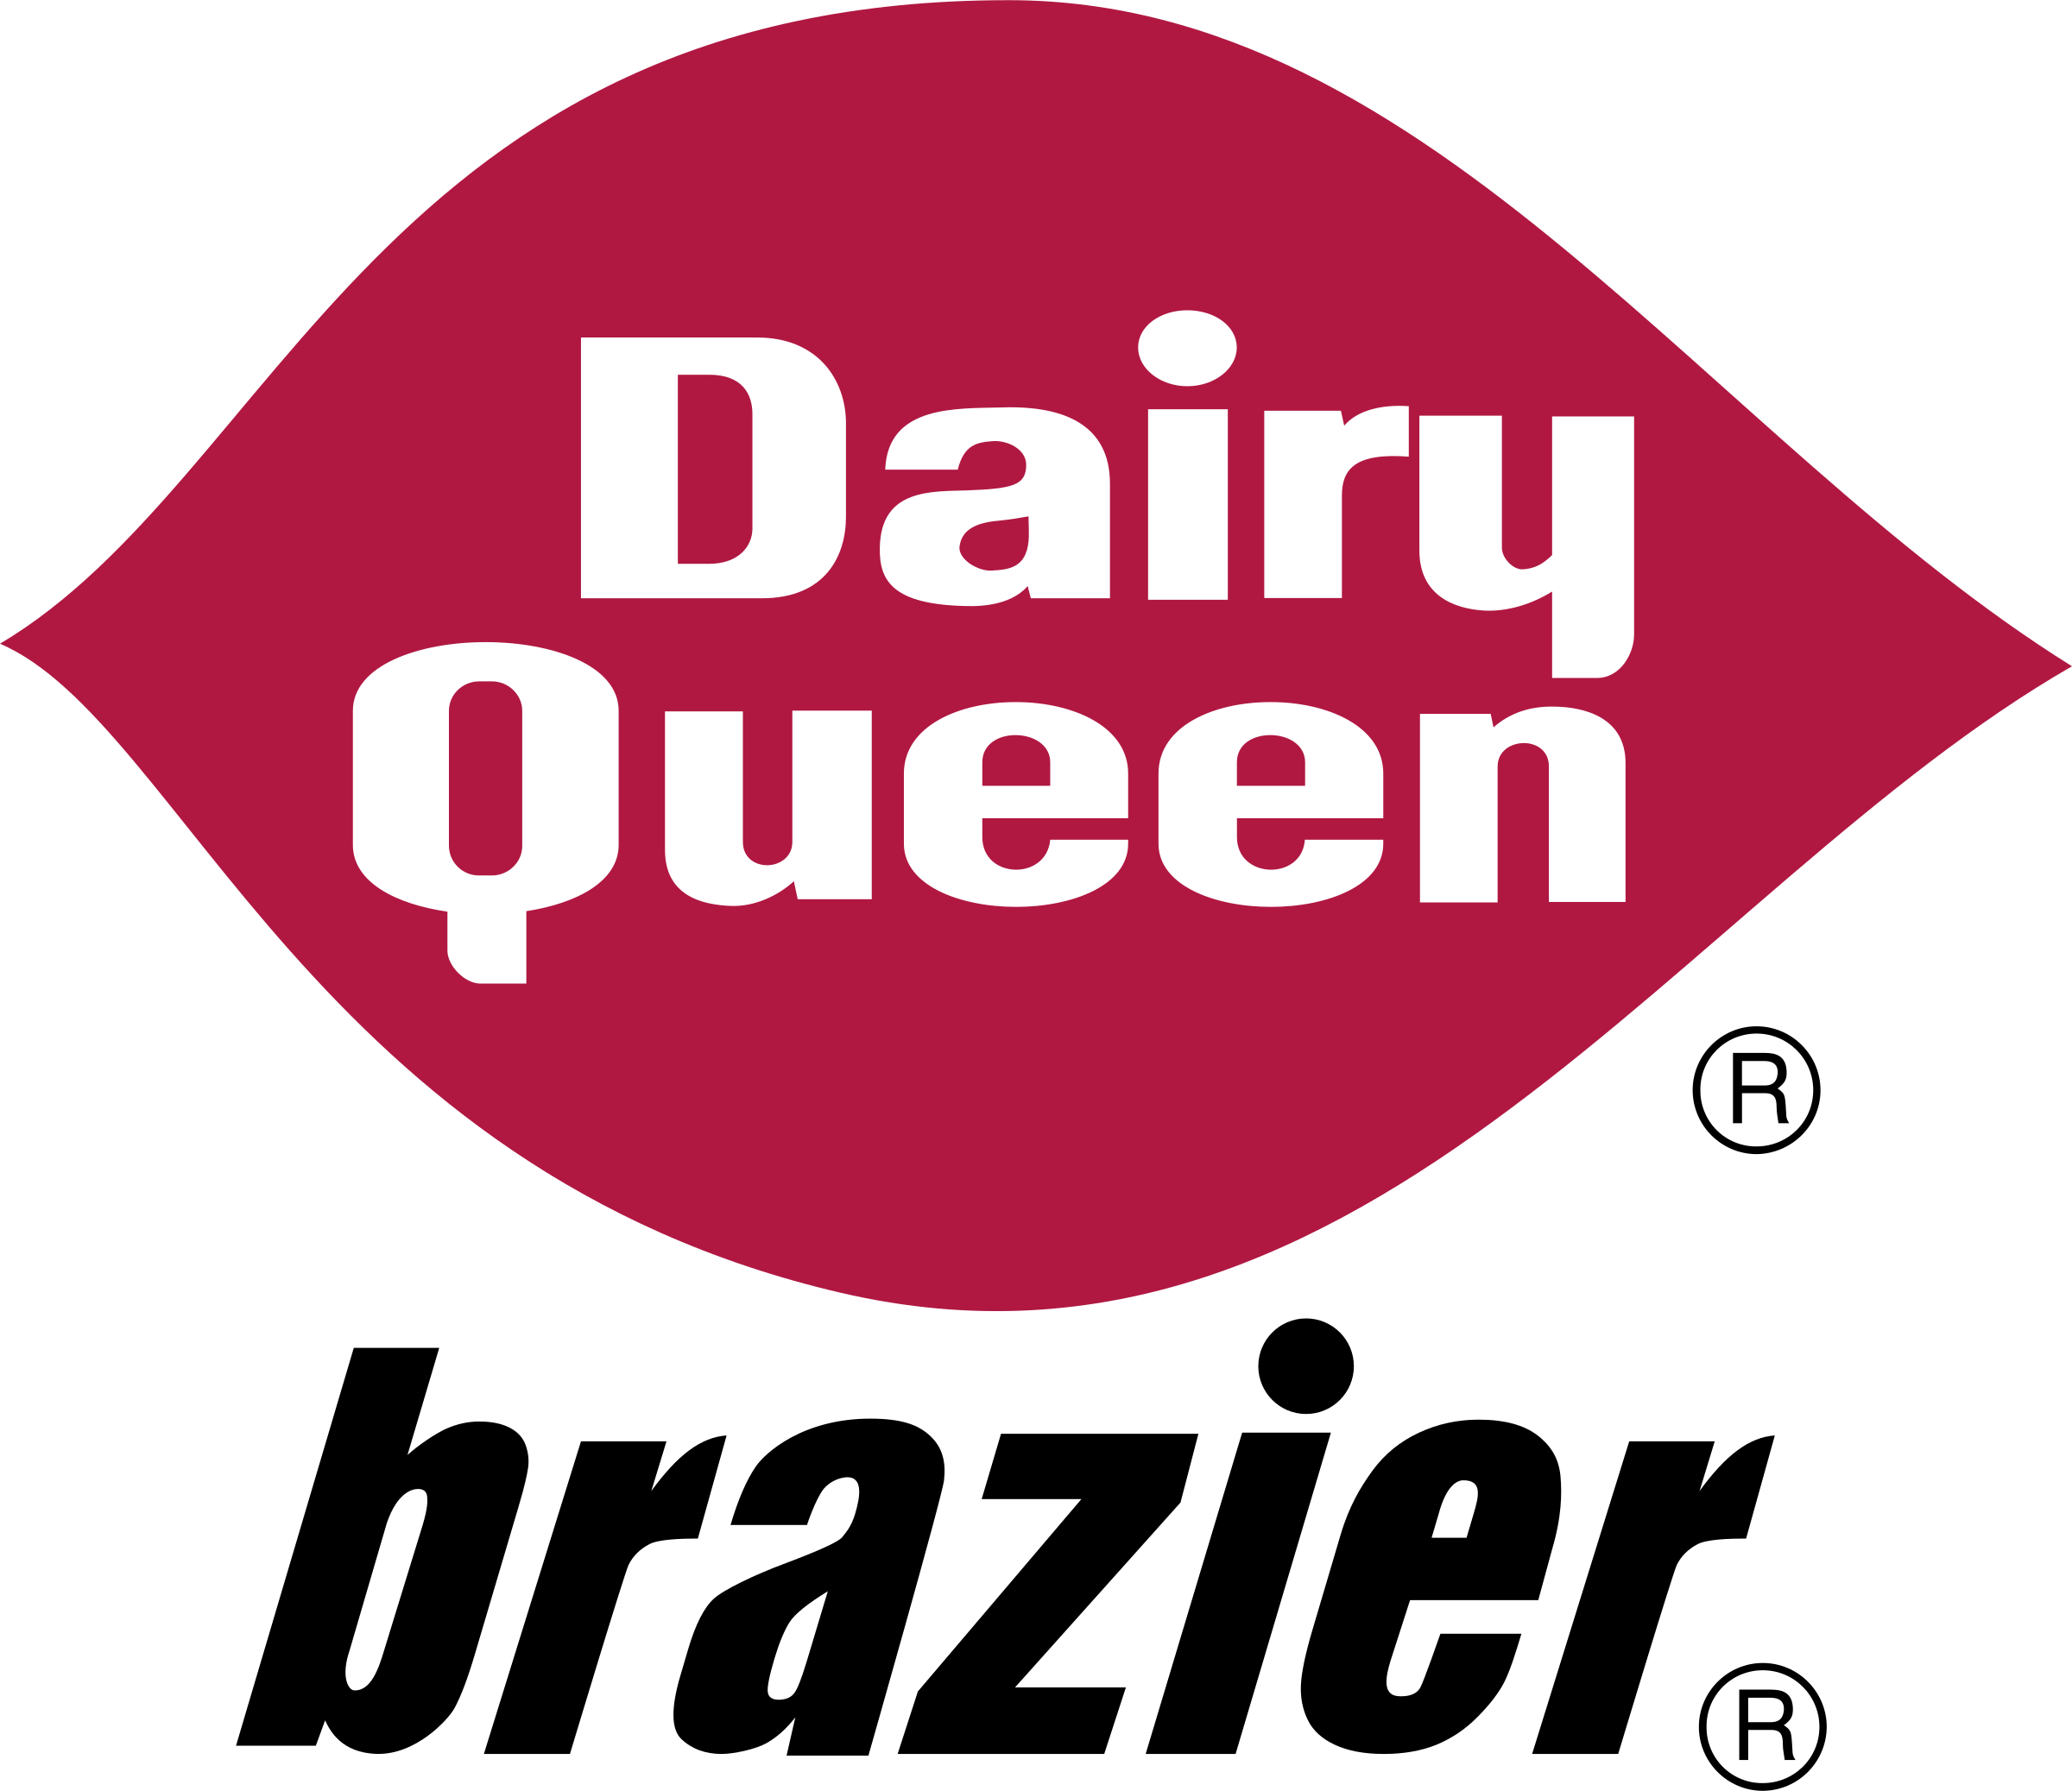 Download Dairy Queen Logo Vector at Vectorified.com | Collection of ...